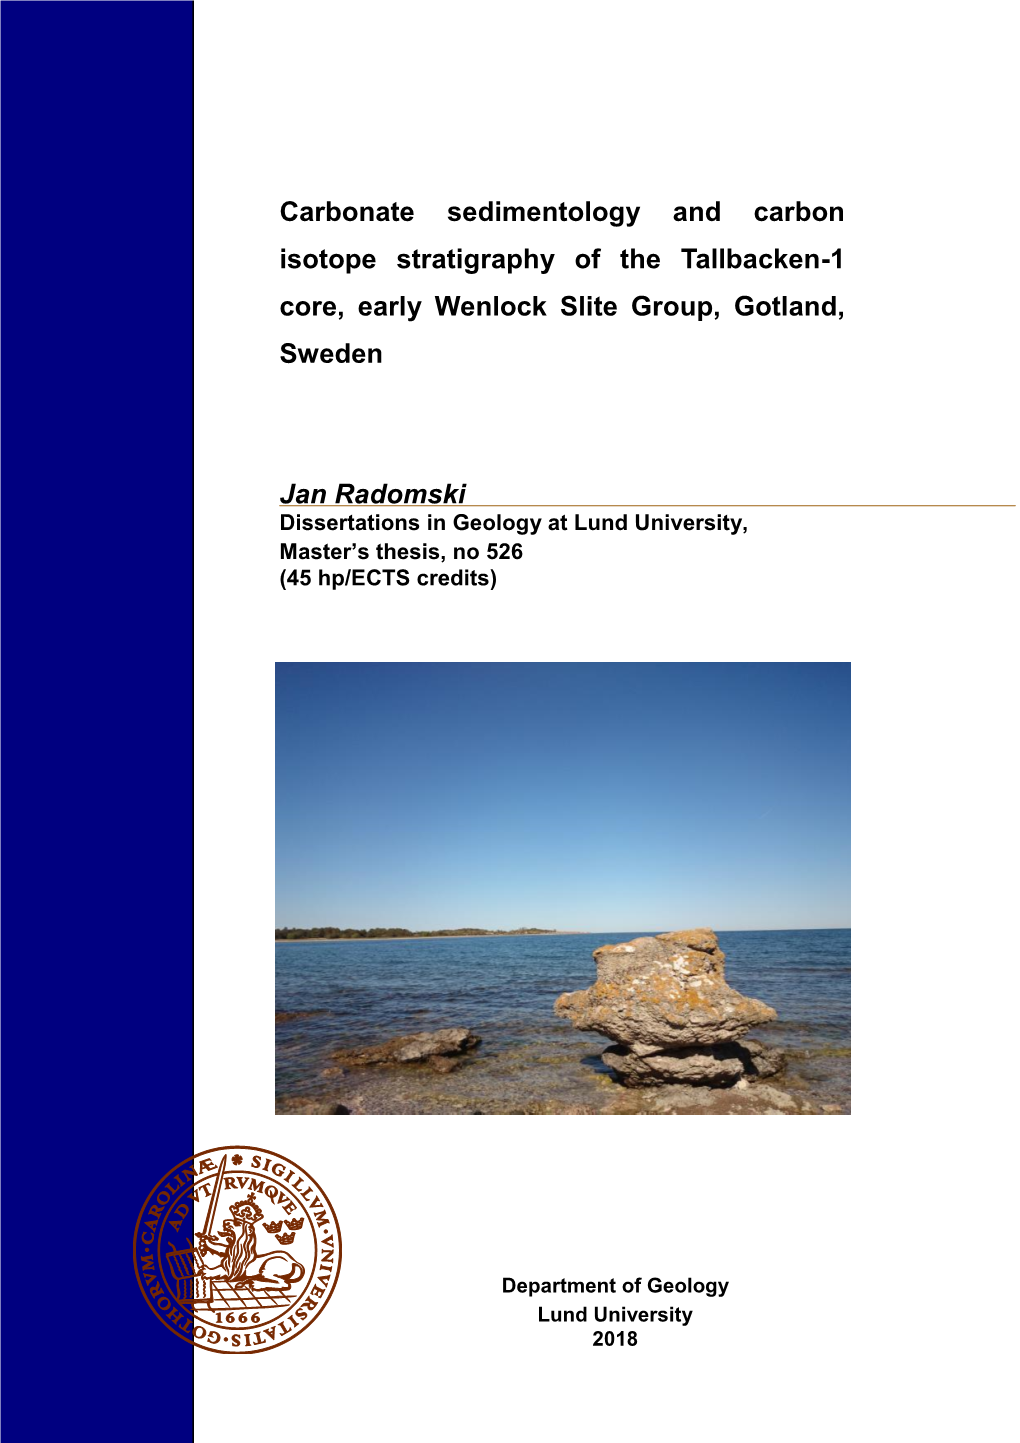 Carbonate Sedimentology and Carbon Isotope Stratigraphy of the Tallbacken-1 Core, Early Wenlock Slite Group, Gotland, Sweden